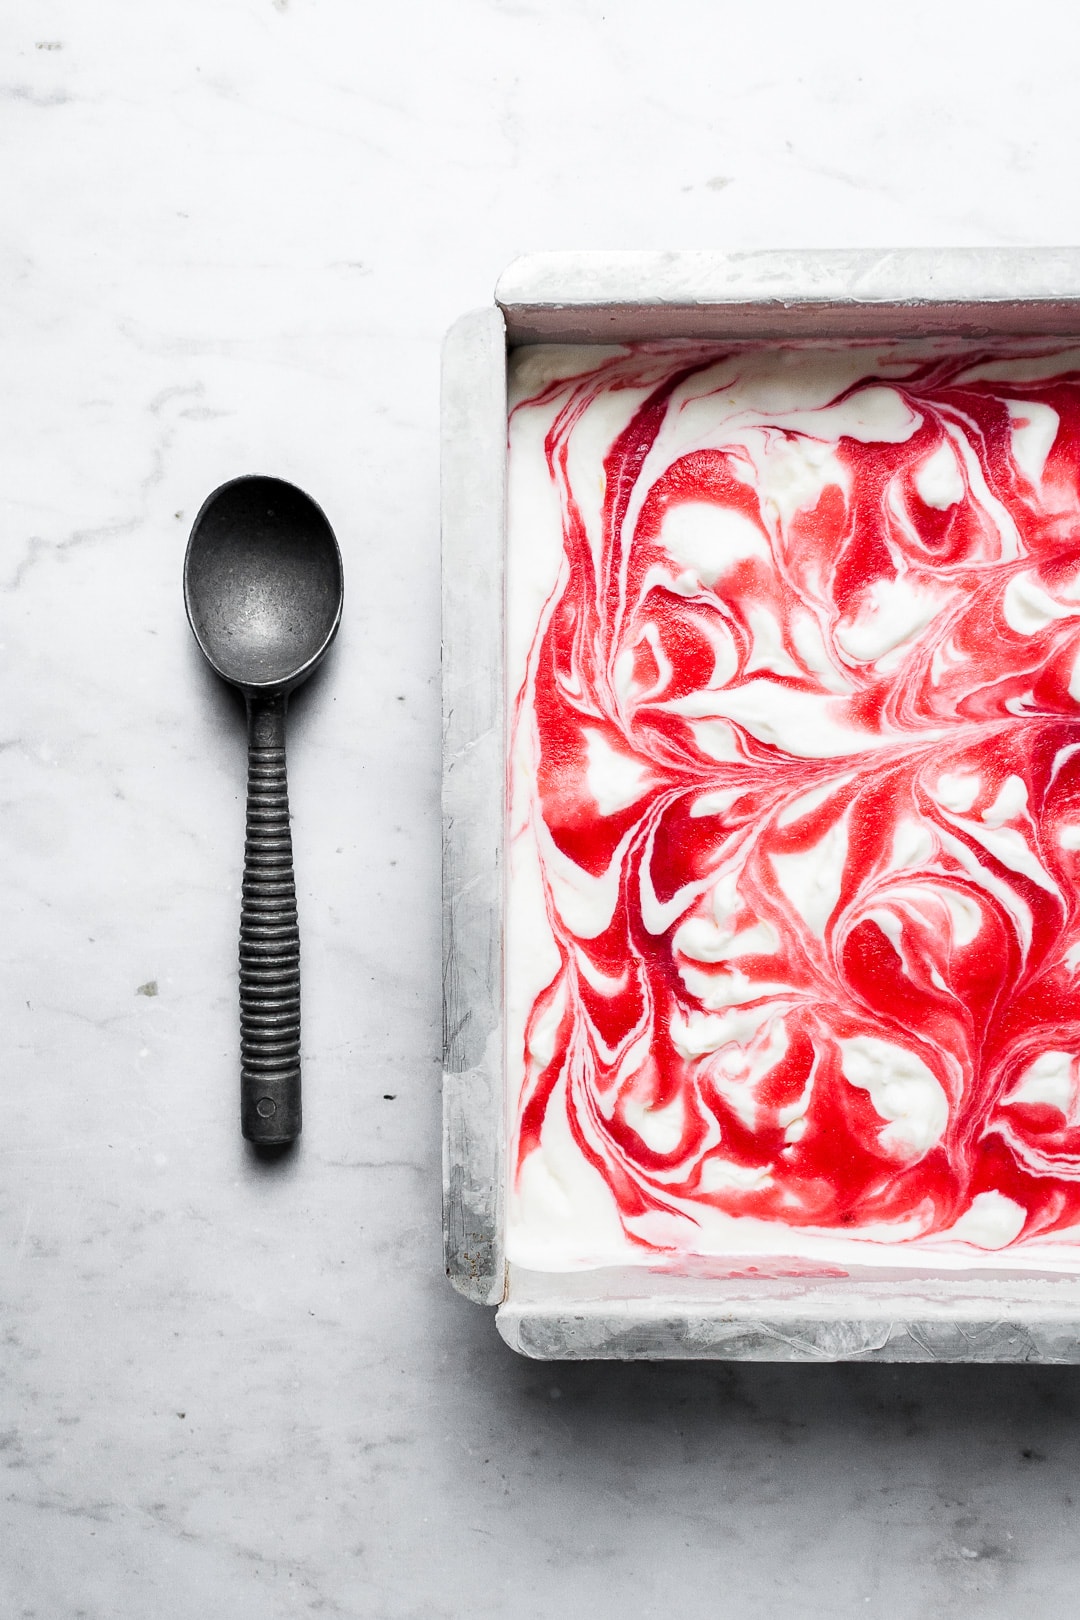 Metal pan of white ice cream with red berry swirl on a marble backdrop with a vintage ice cream scoop nearby